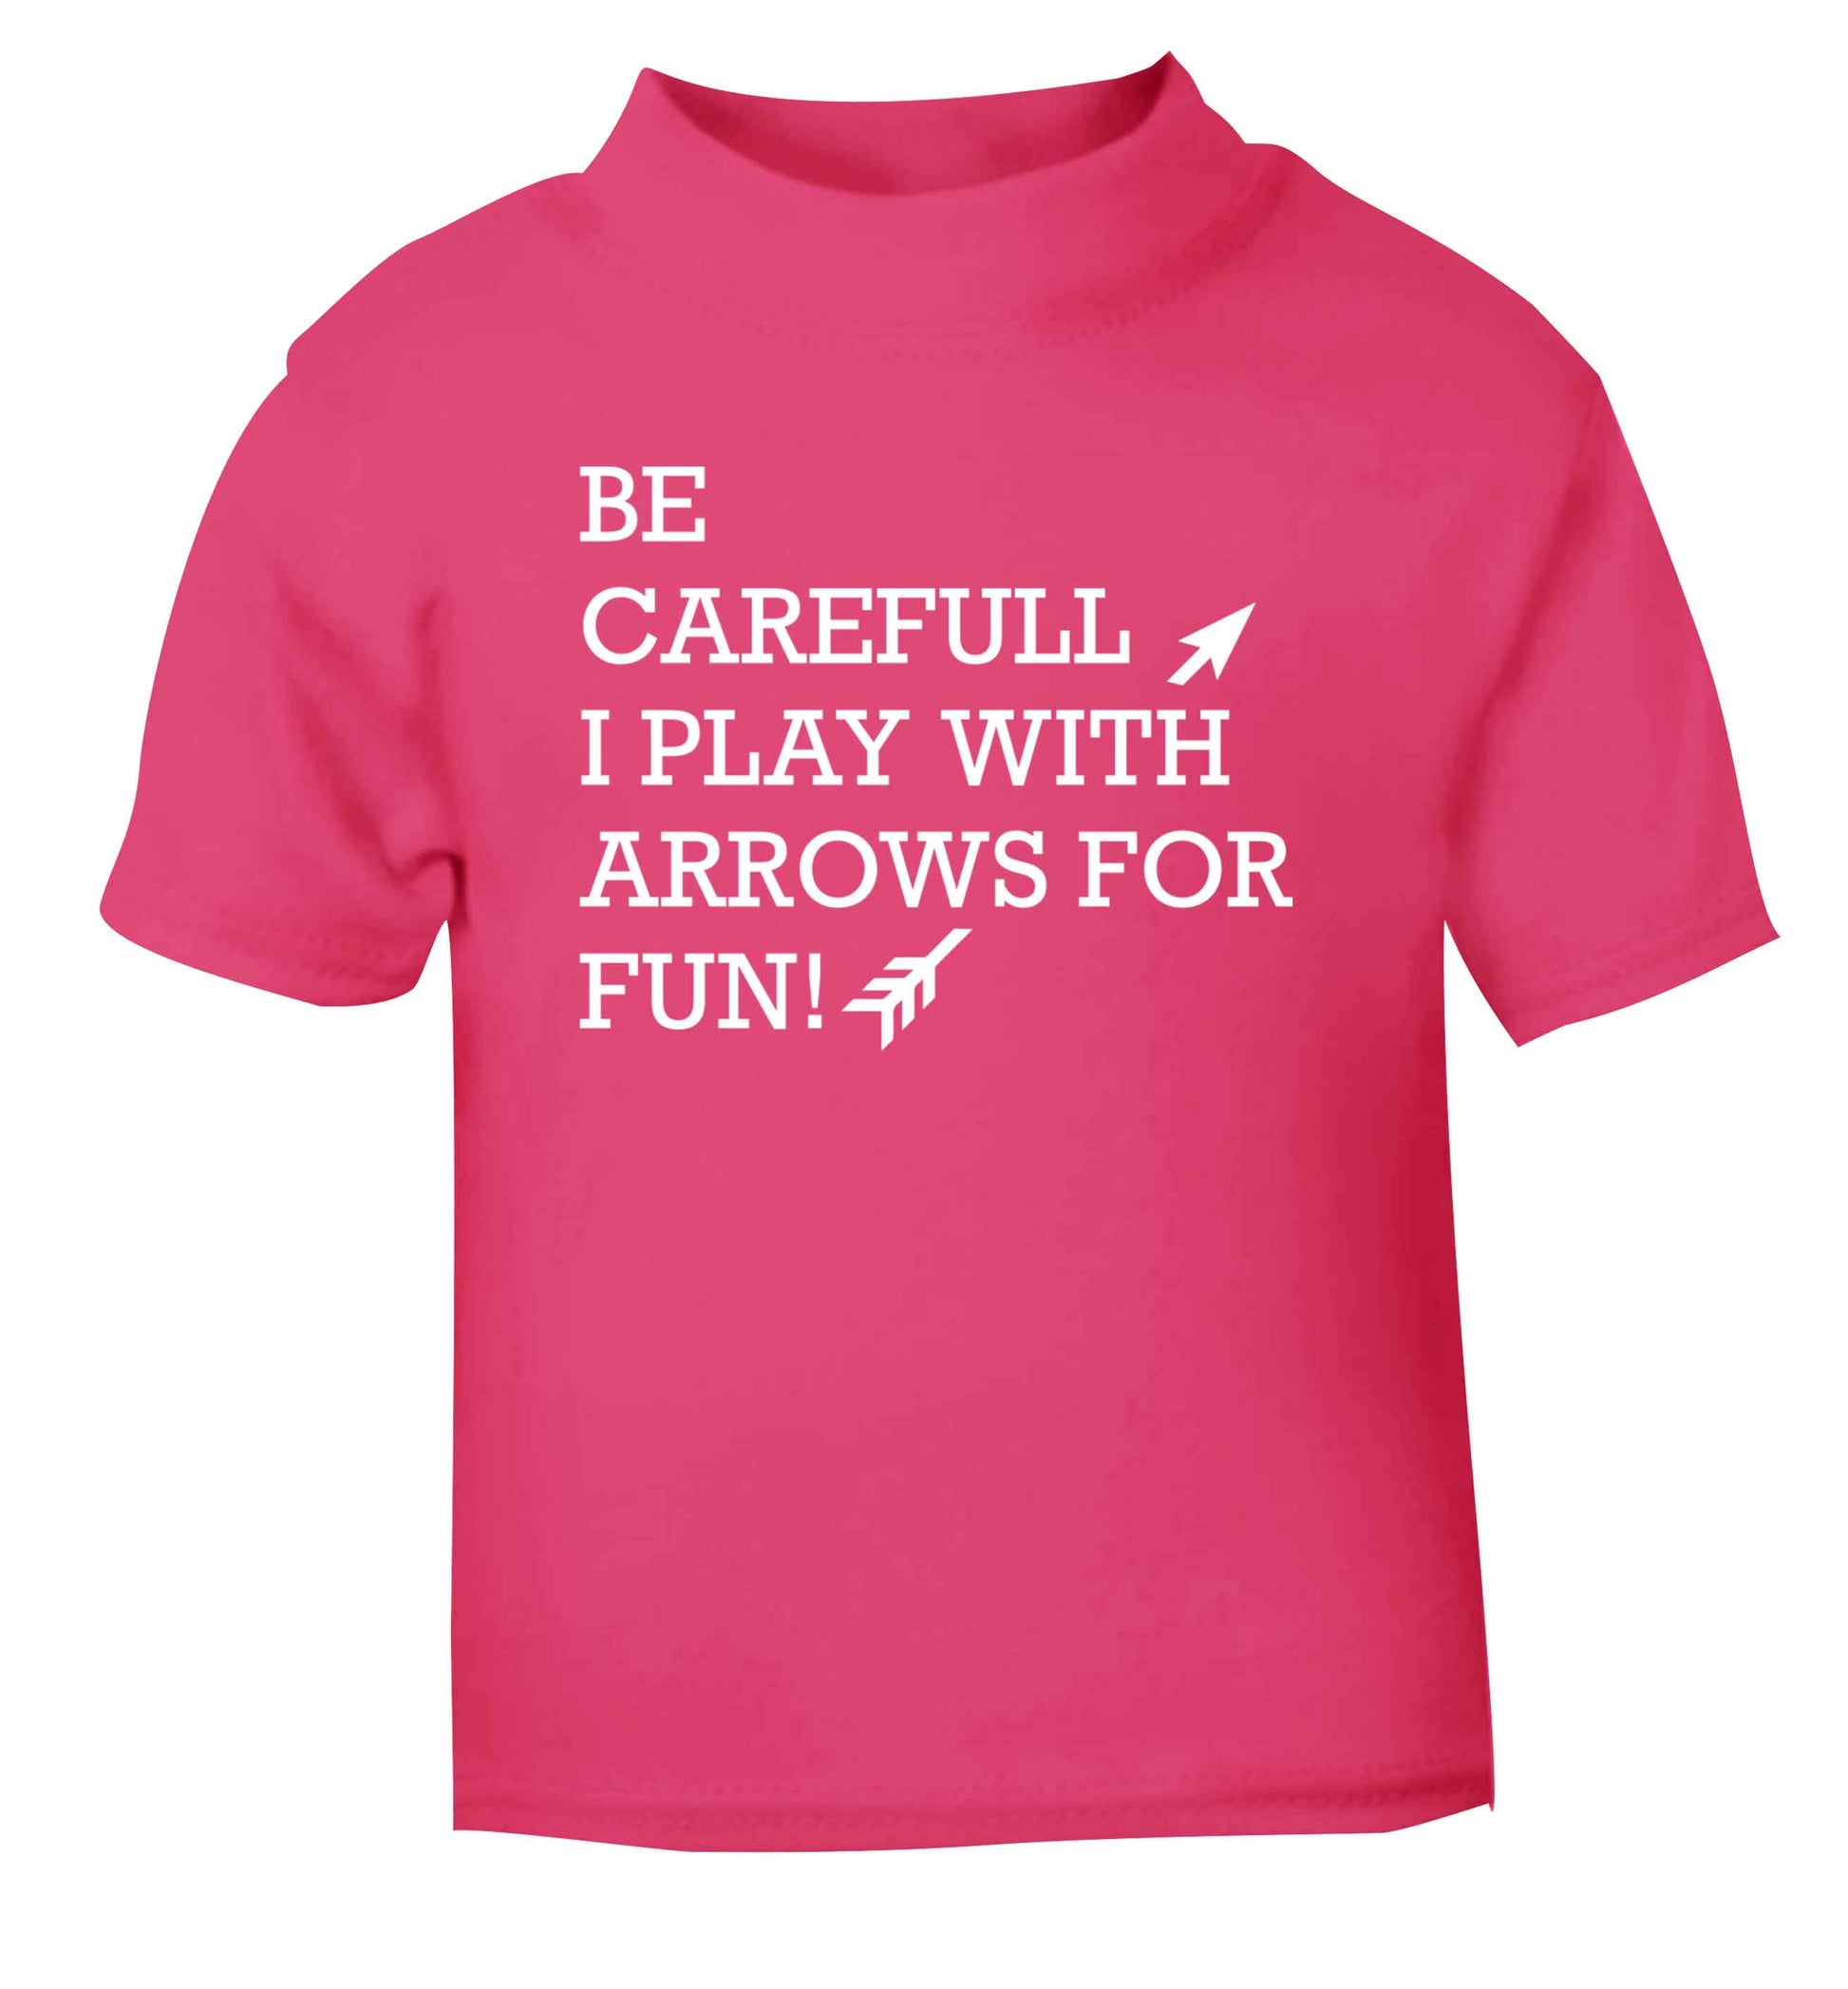 Be carefull I play with arrows for fun pink Baby Toddler Tshirt 2 Years